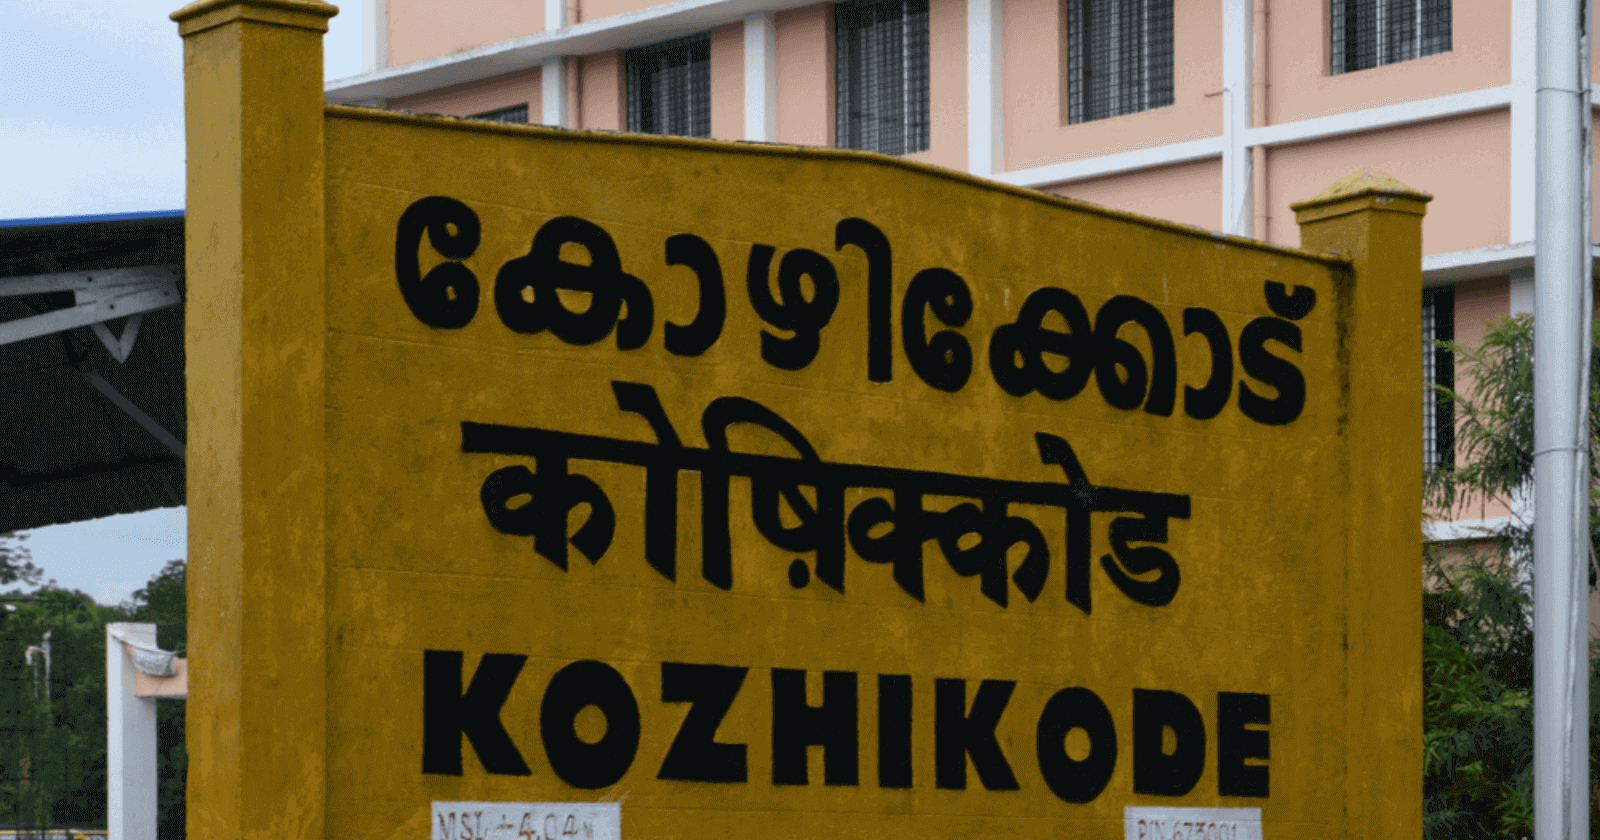 Kozhikode RTO Office: RTO Office, Website and Contact details